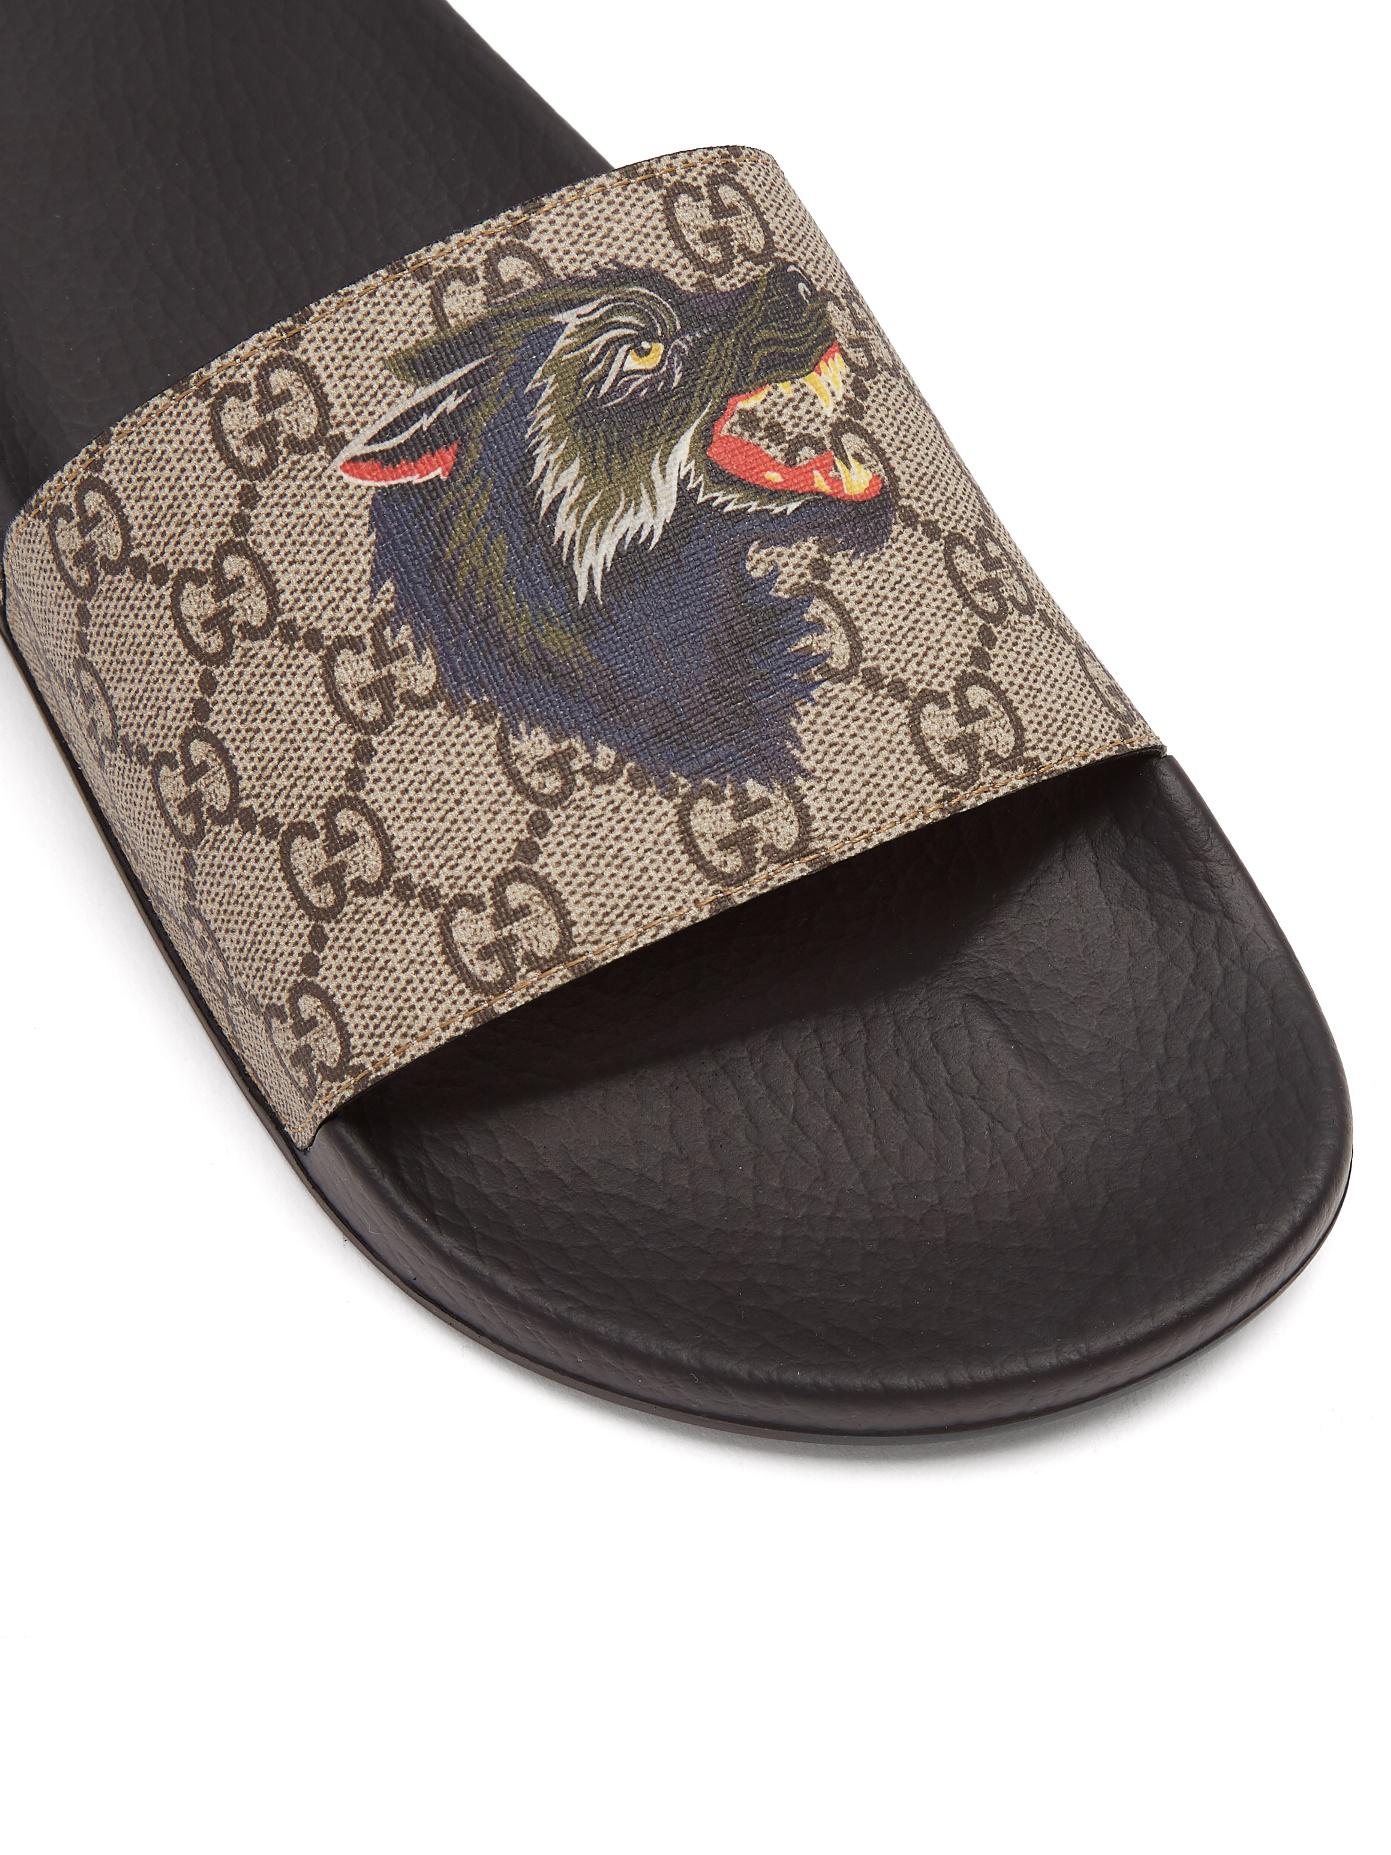 Wolf in Gucci Loafers by Tara Lain